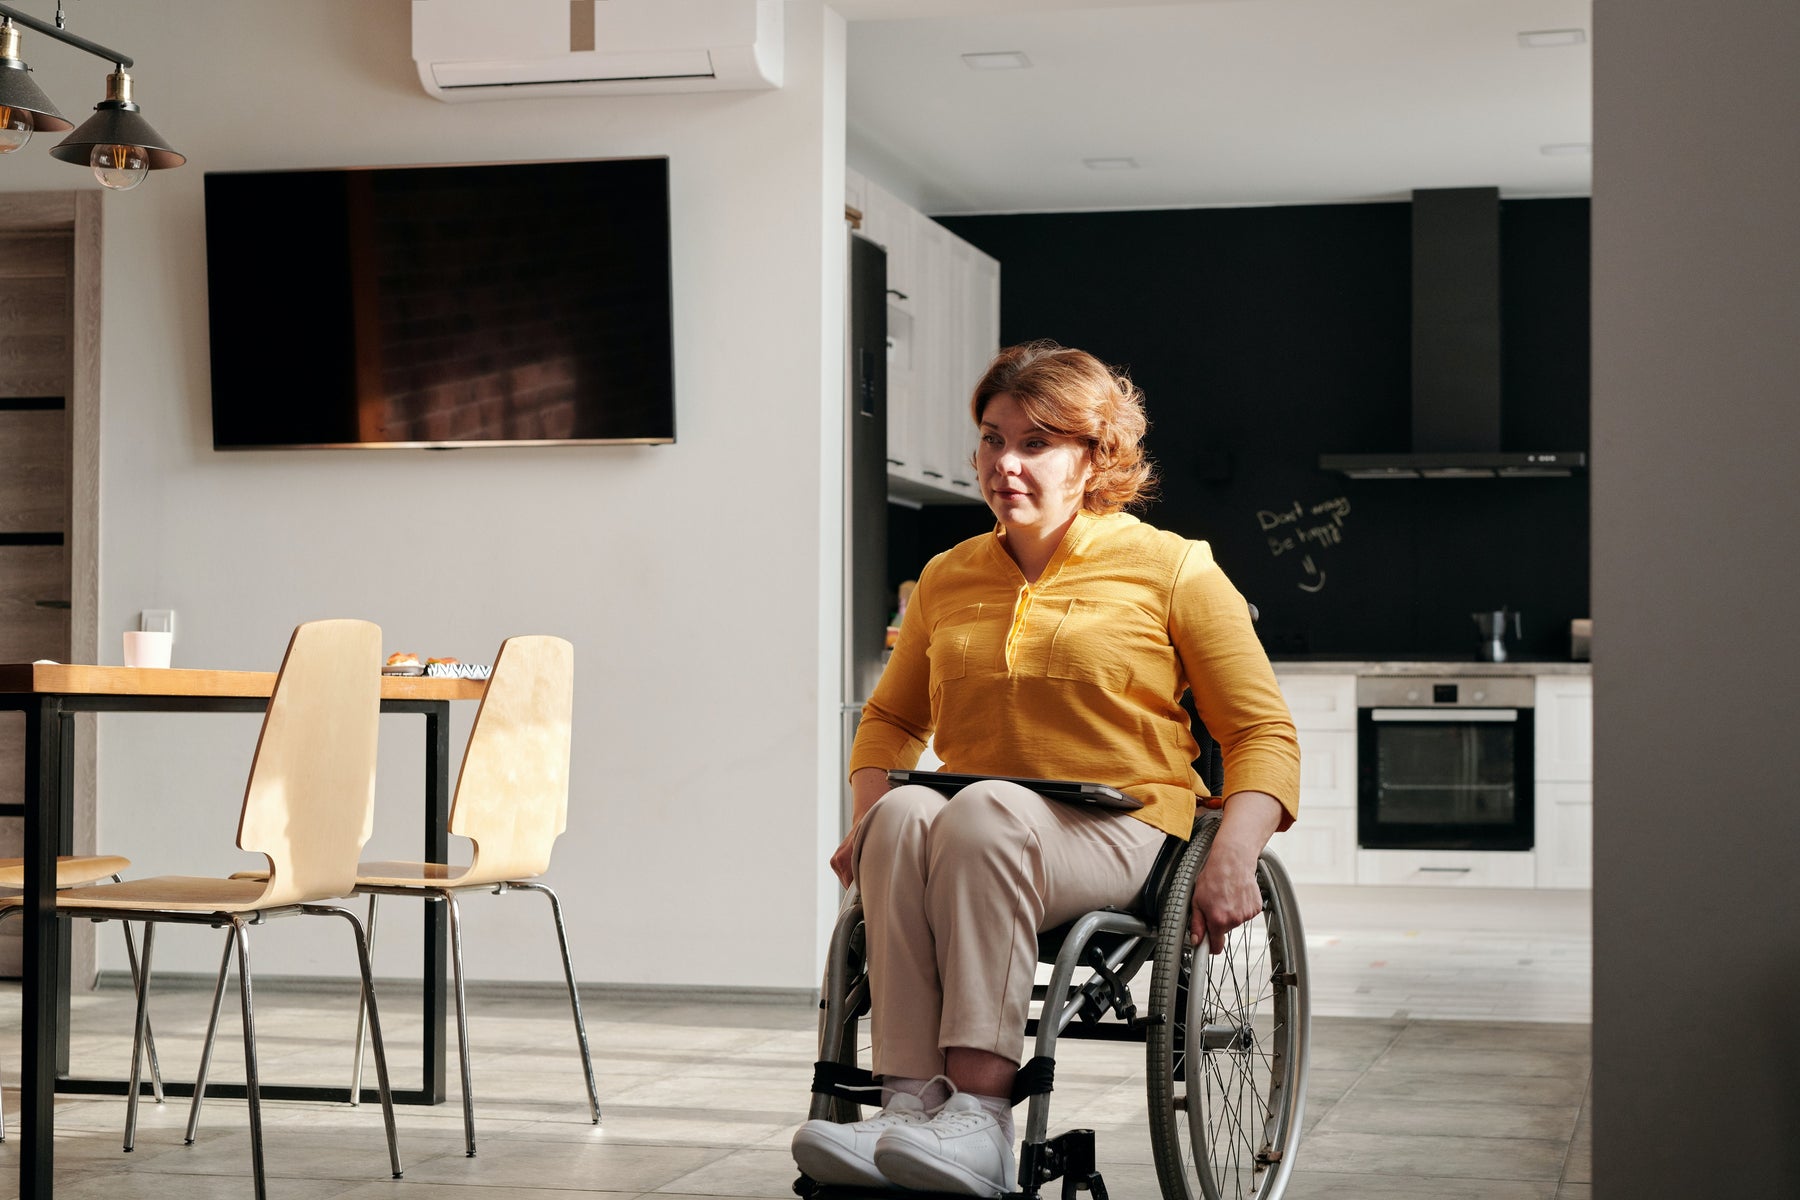 Options For Those With Limited Mobility